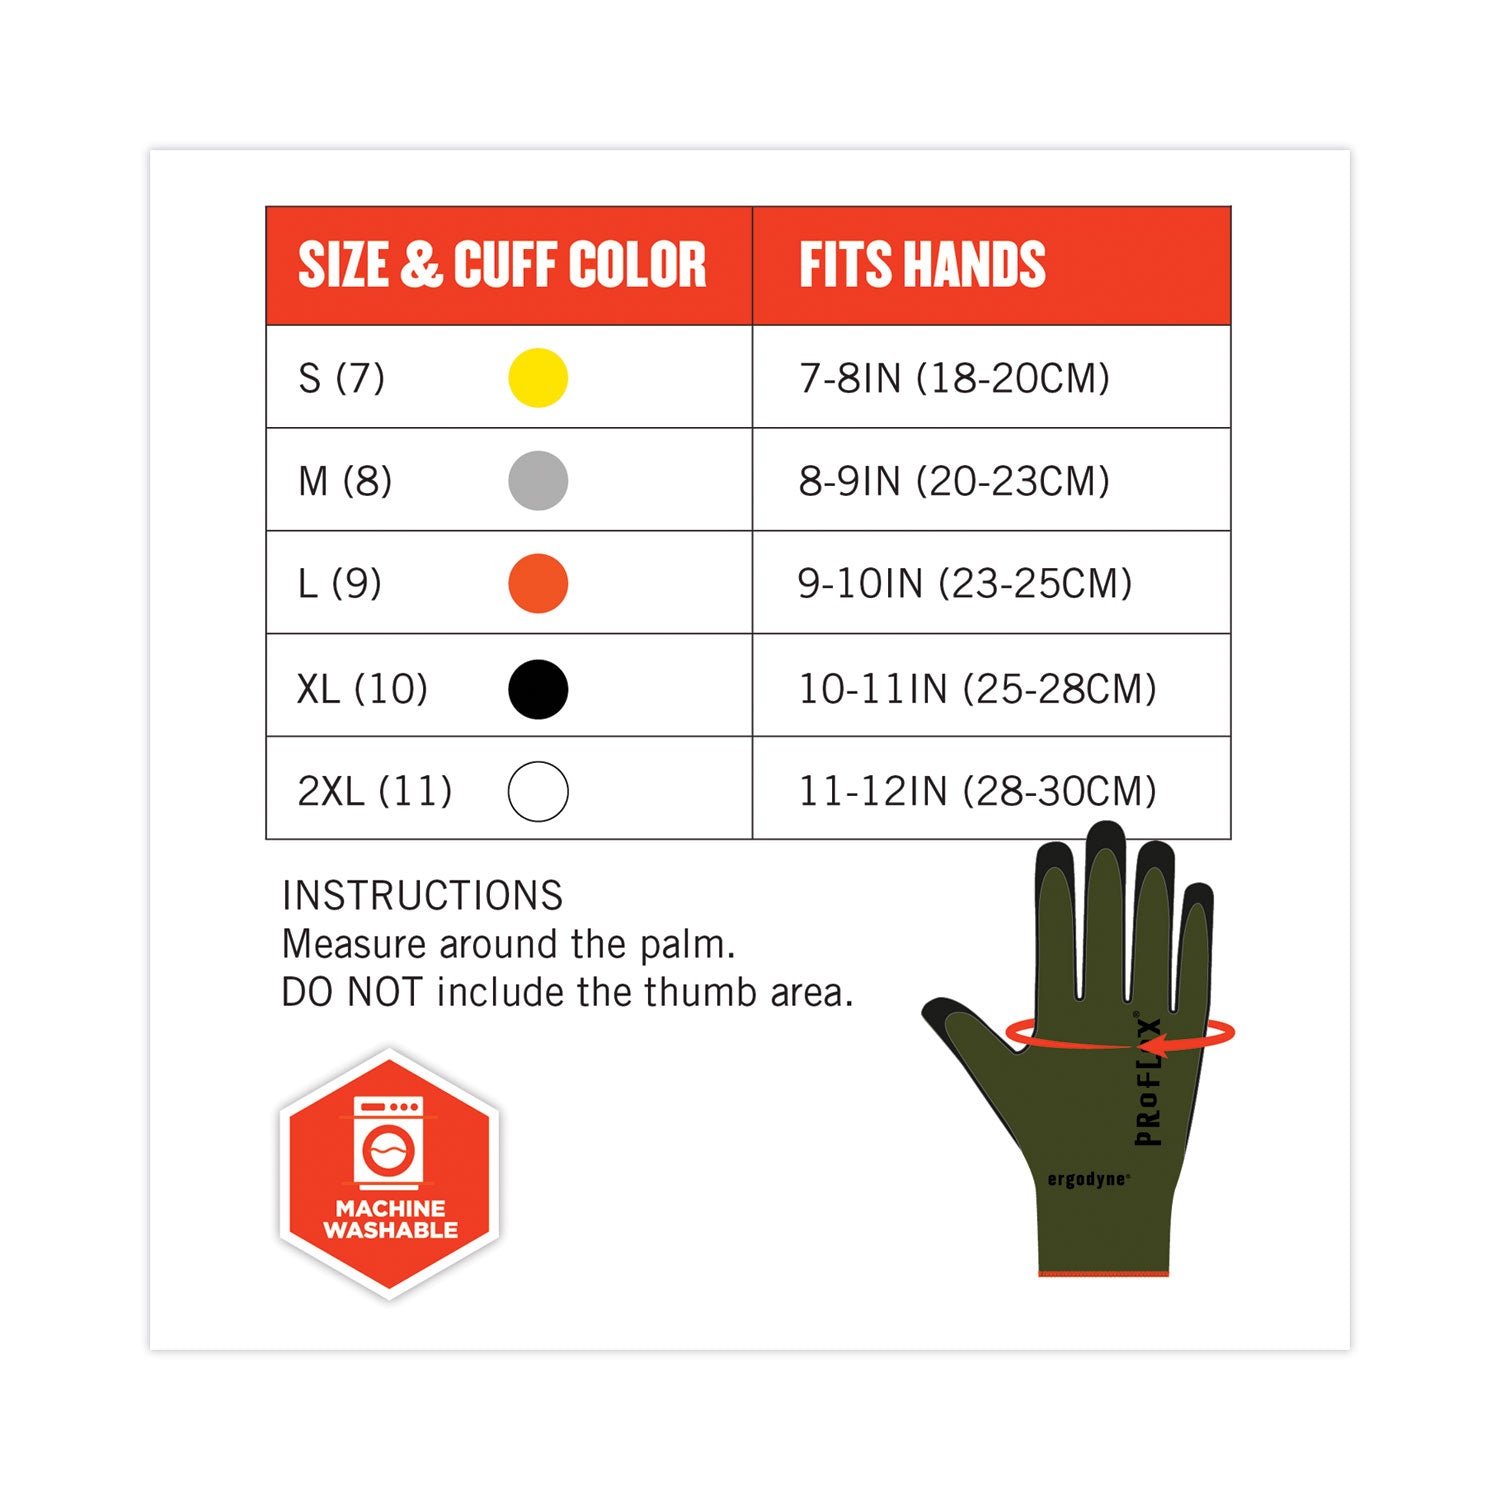 proflex-7042-ansi-a4-nitrile-coated-cr-gloves-green-2x-large-12-pairs-pack-ships-in-1-3-business-days_ego10336 - 7